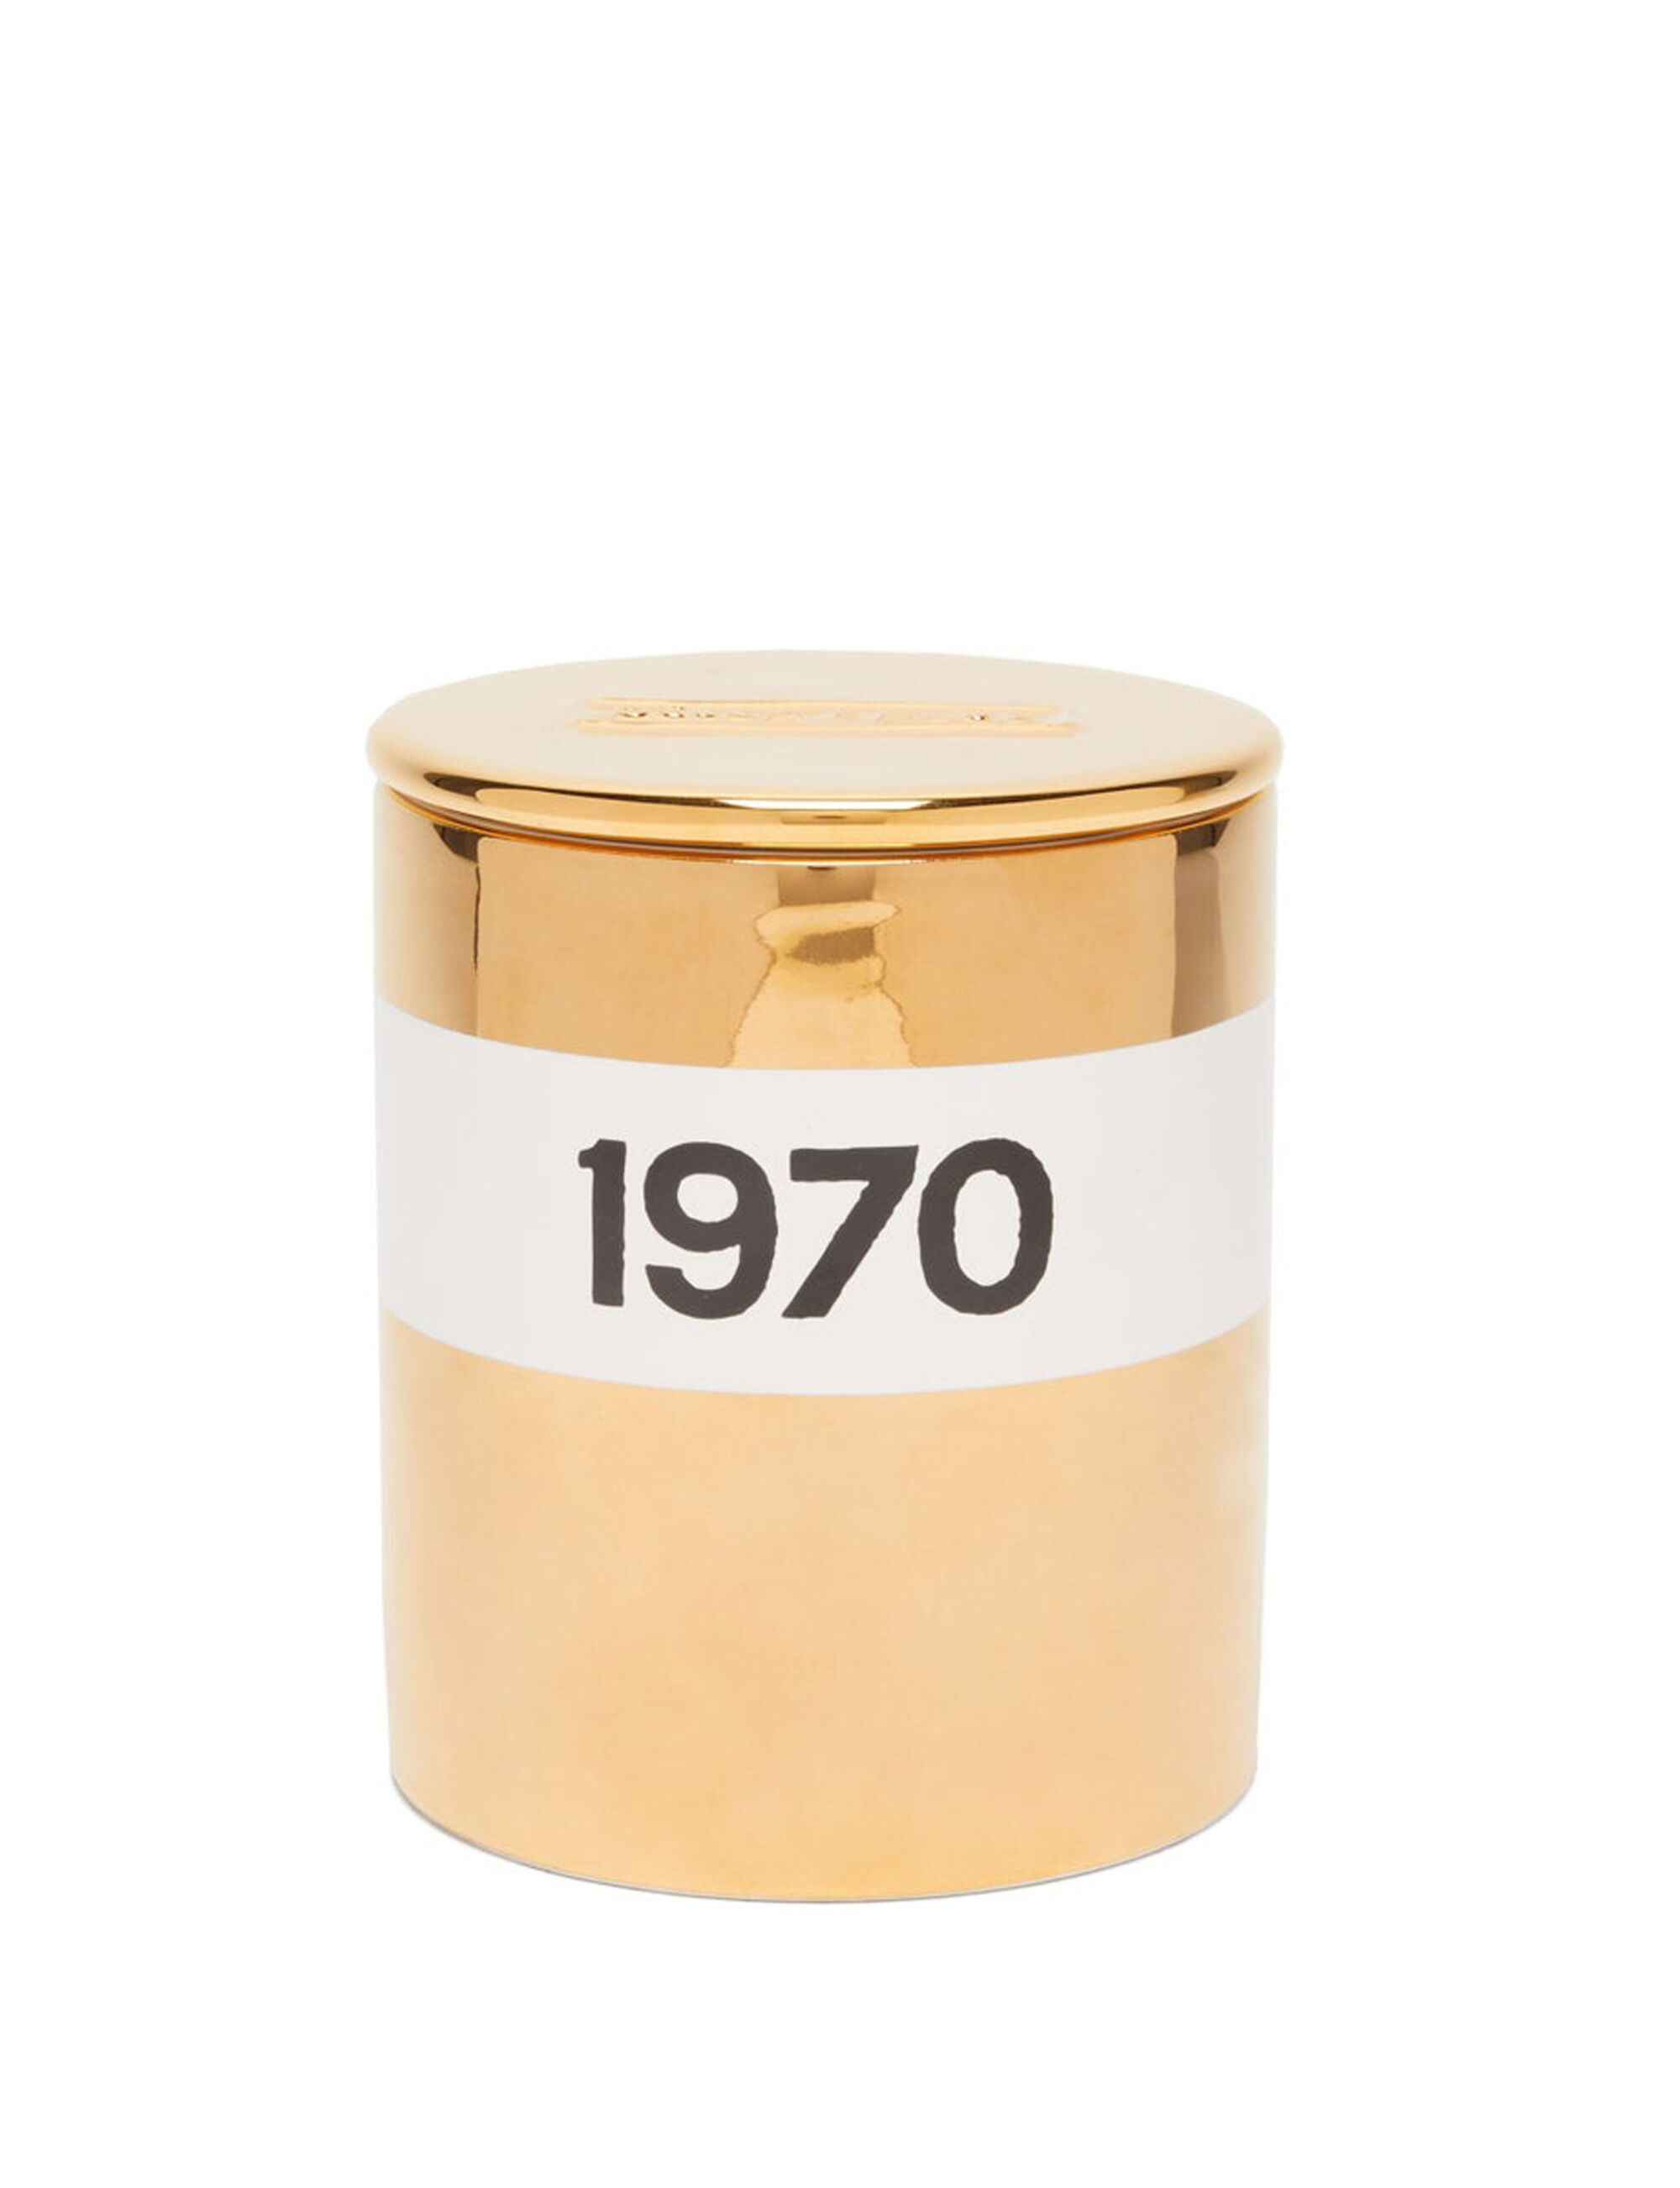 The Wick - 1970 large-scented candle, Bella Freud